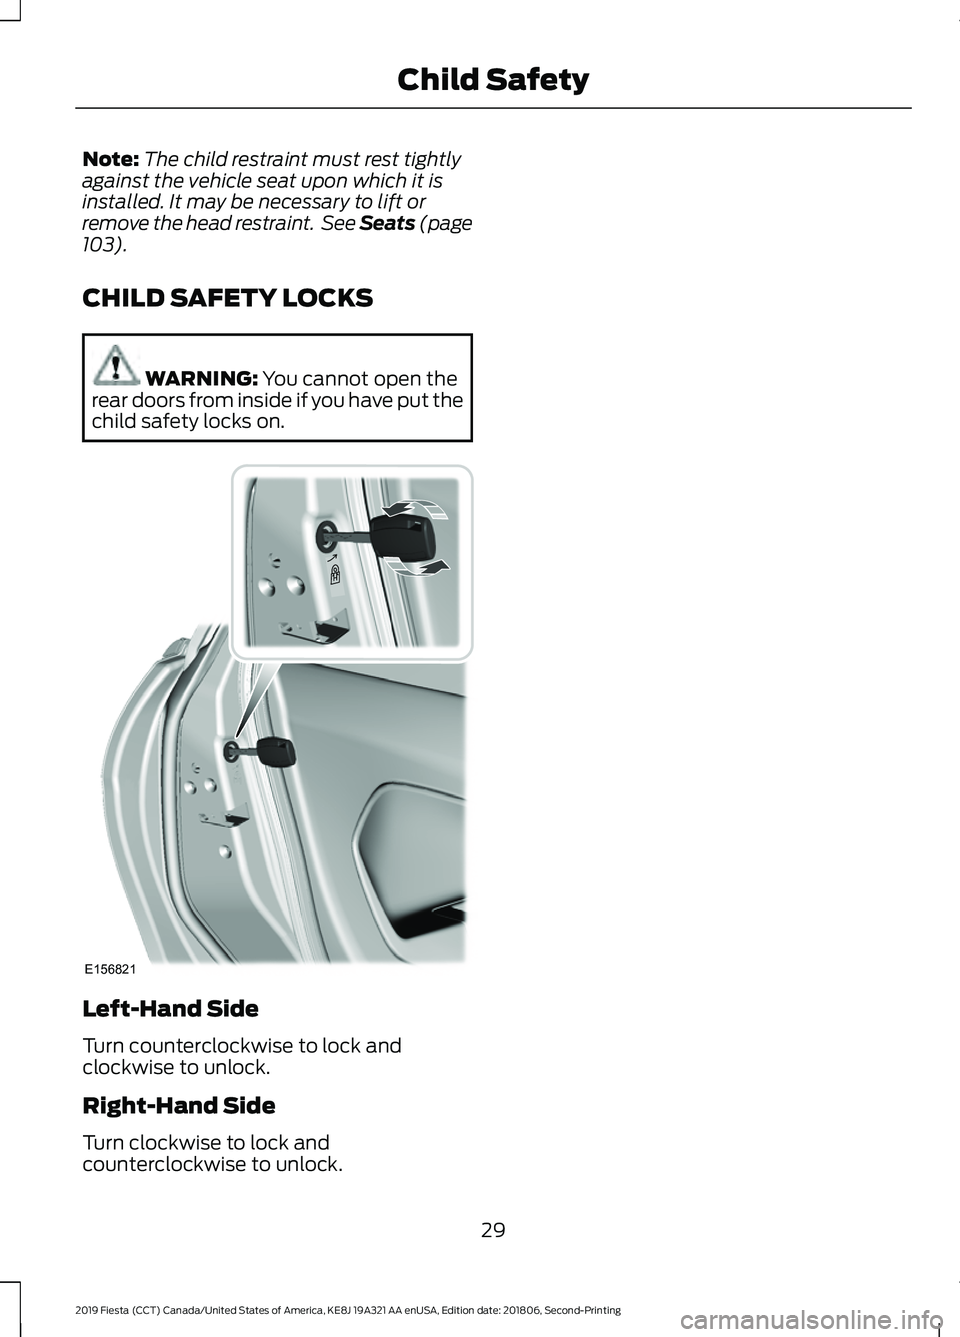 FORD FIESTA 2019  Owners Manual Note:
The child restraint must rest tightly
against the vehicle seat upon which it is
installed. It may be necessary to lift or
remove the head restraint.  See Seats (page
103).
CHILD SAFETY LOCKS WAR